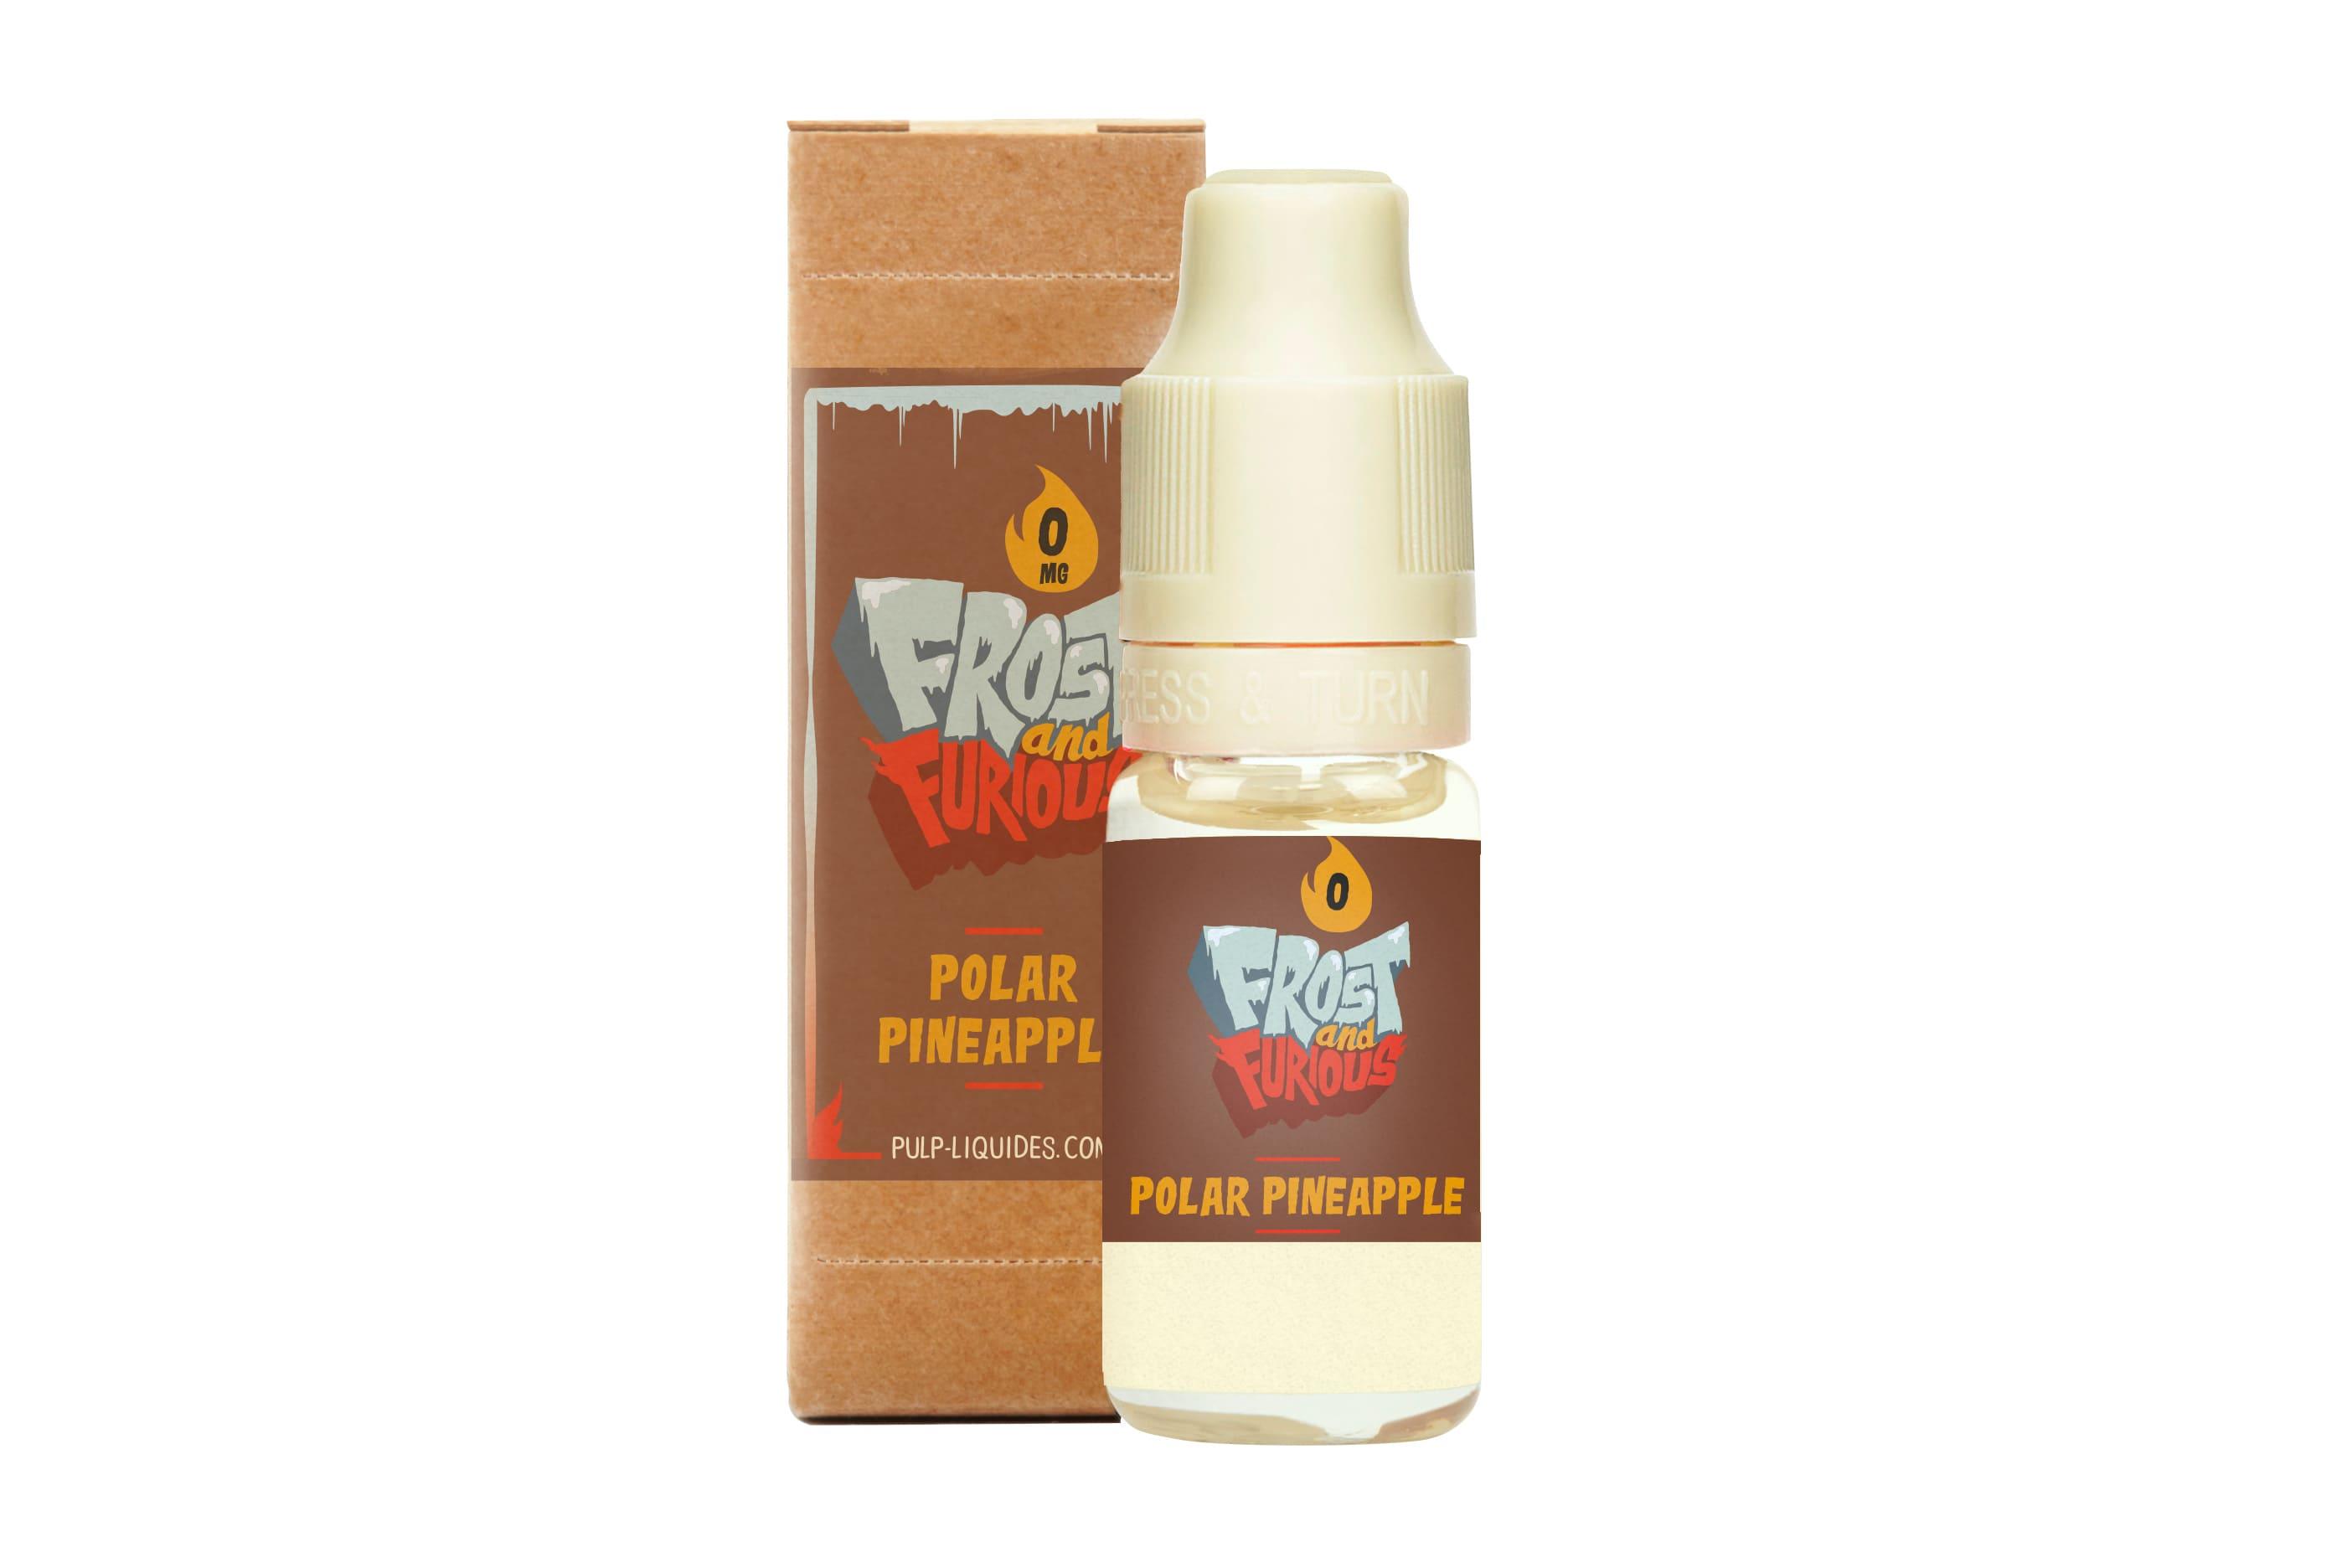 Polar Pineapple Frost and Furious